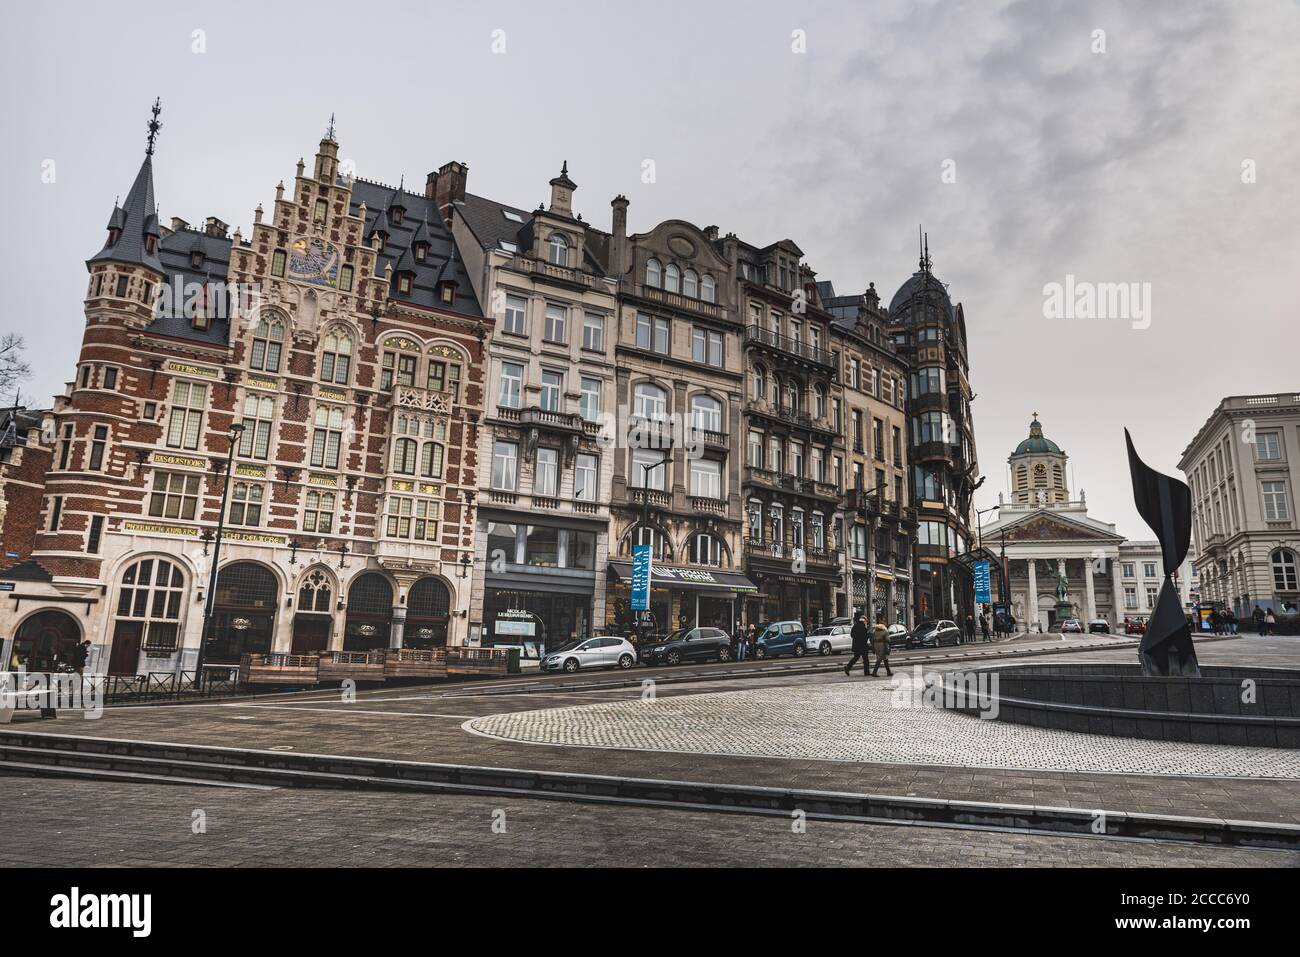 The Whirling Ear monument by Alexander Calder with a row of typical Belgian houses provide a gothic neoclassical architectural glimpse, Brussels Stock Photo